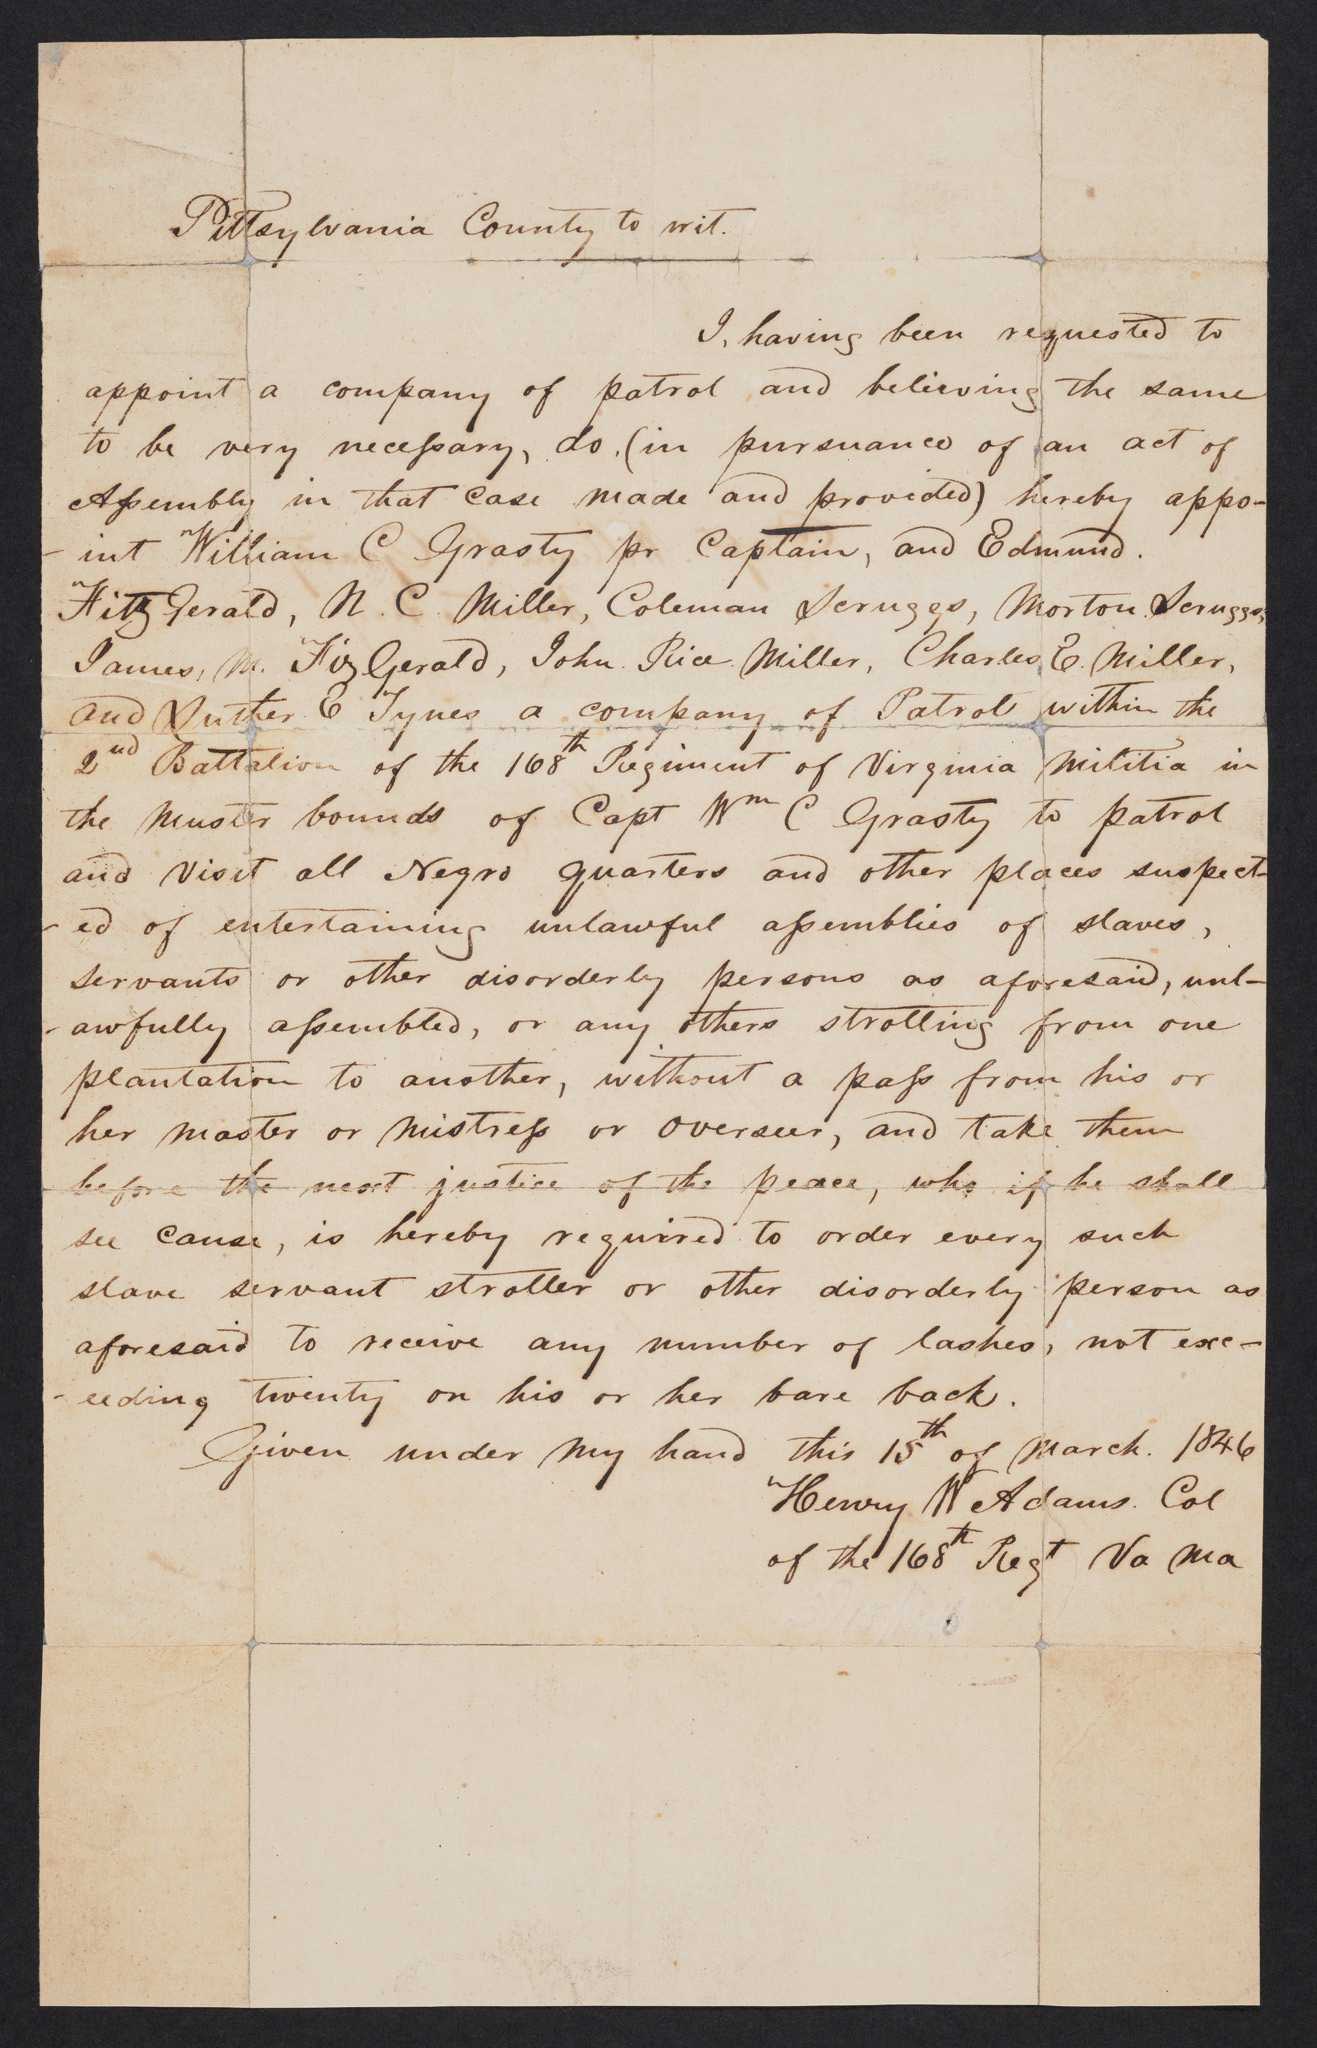 A manuscript document, one sheet of handwritten script in black ink on white paper, written by Col. Henry Ward Adams of the Virginia Militia and addressed to Capt. William C. Grasty. The document reads [I, having been requested to / appoint a company of patrol and believing the same / to be very necessary, do (in pursuance of an act of / Assembly in that case made and provided) hereby appo- / -int William C Grasty pr Captain, and Edmund / Fitzgerald, N. C. Miller, Coleman Scruggs, Morton Scruggs, / James M. Fitzgerald, John Rice Miller, Charles E. Miller, / and Luther E. Tynes a company of Patrol within the / 2nd Battalion of the 168th Regiment of Virginia Militia in / the muster bounds of Capt Wm C Grasty to patrol / and visit all Negro quarters and other places suspect- / -ed of entertaining unlawful assemblies of slaves, / servants or other disorderly persons as aforesaid, unl- / -awfully assembled, or any others strolling from one plantation to another, without a pass from his or / her master or mistress or overseer, and take them / before the next justice of the peace, who if he shall / see cause, is hereby required to order every such / slave servant stroller or other disorderly person as / aforesaid to receive any number of lashes, not exc- / -eeding twenty on his or her bare back.]. On the reverse of the document is written [Capt. William C. Grasty / Mount Airy / Henry Adams / 15 March 1846].